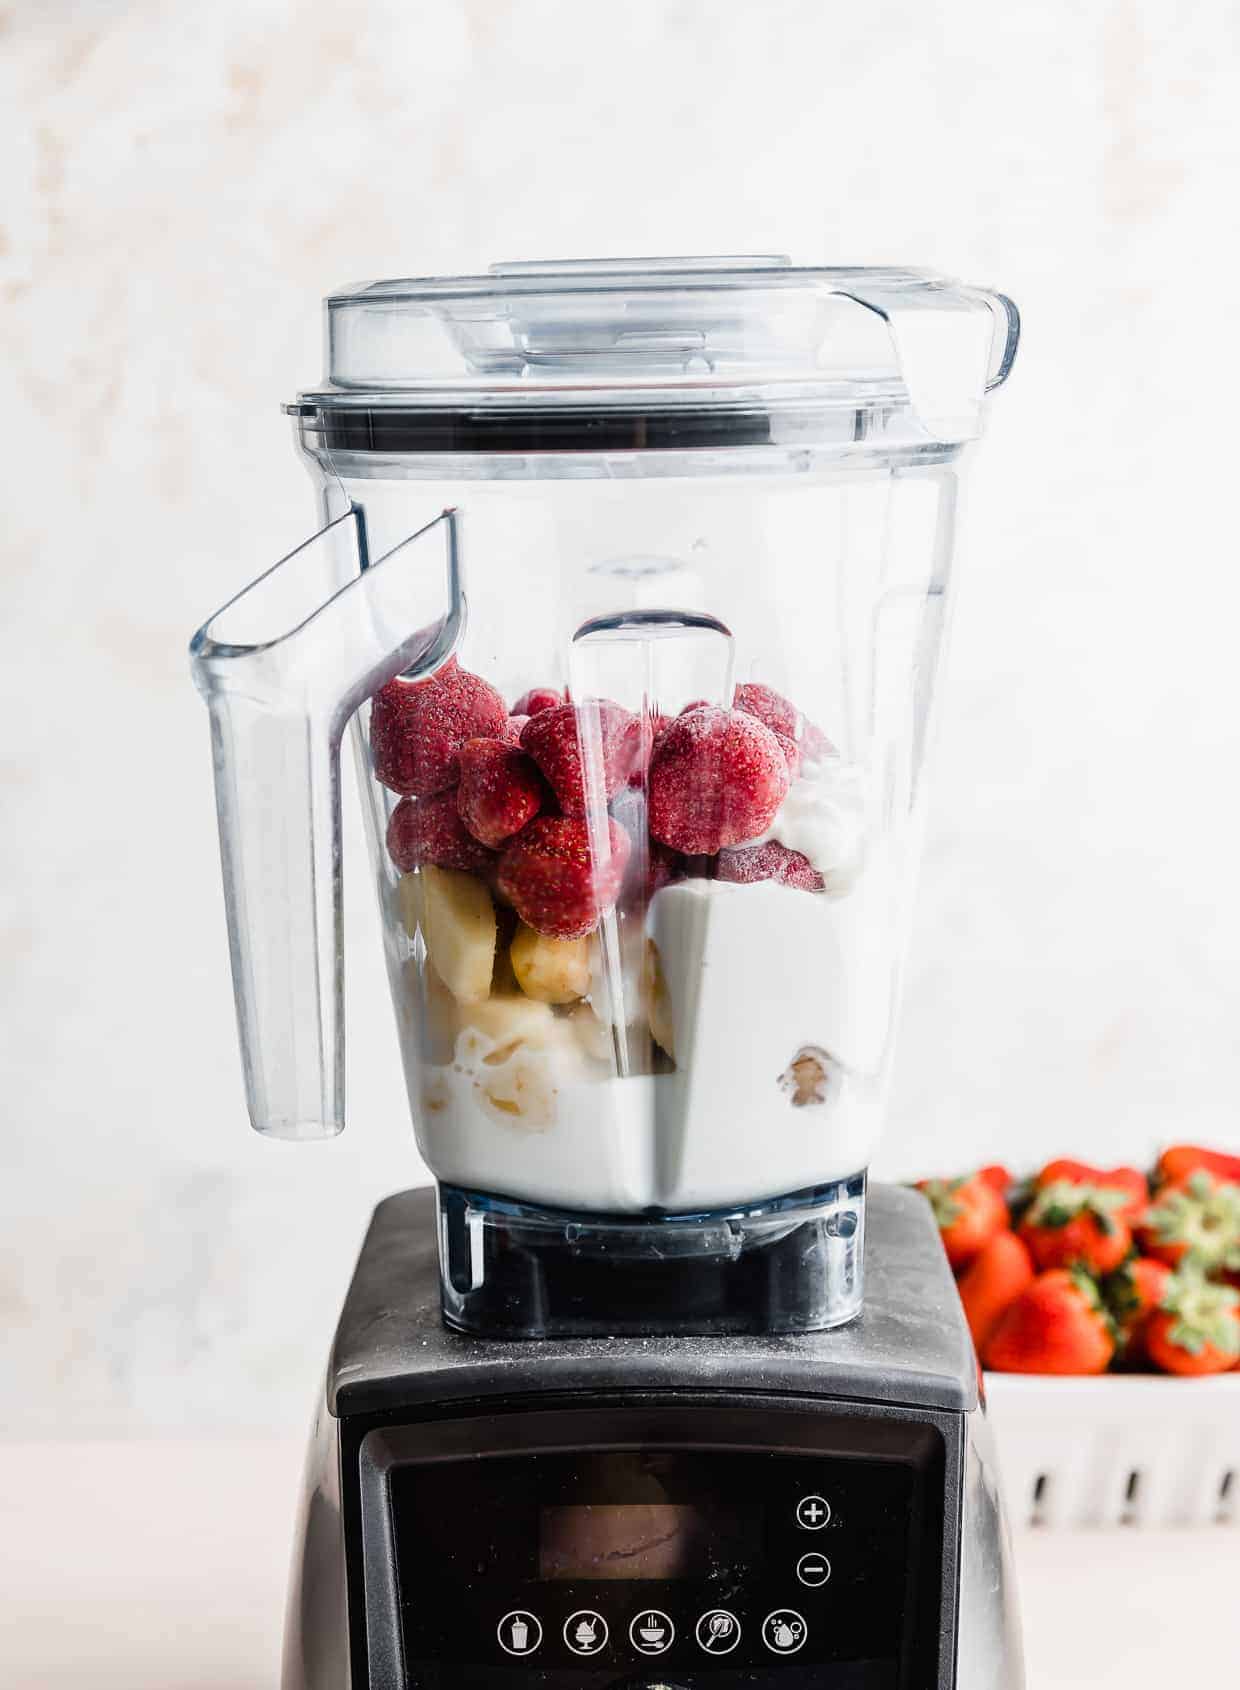 A Vitamix blender full of ingredients used to make a pineapple and strawberry smoothie against a white background.